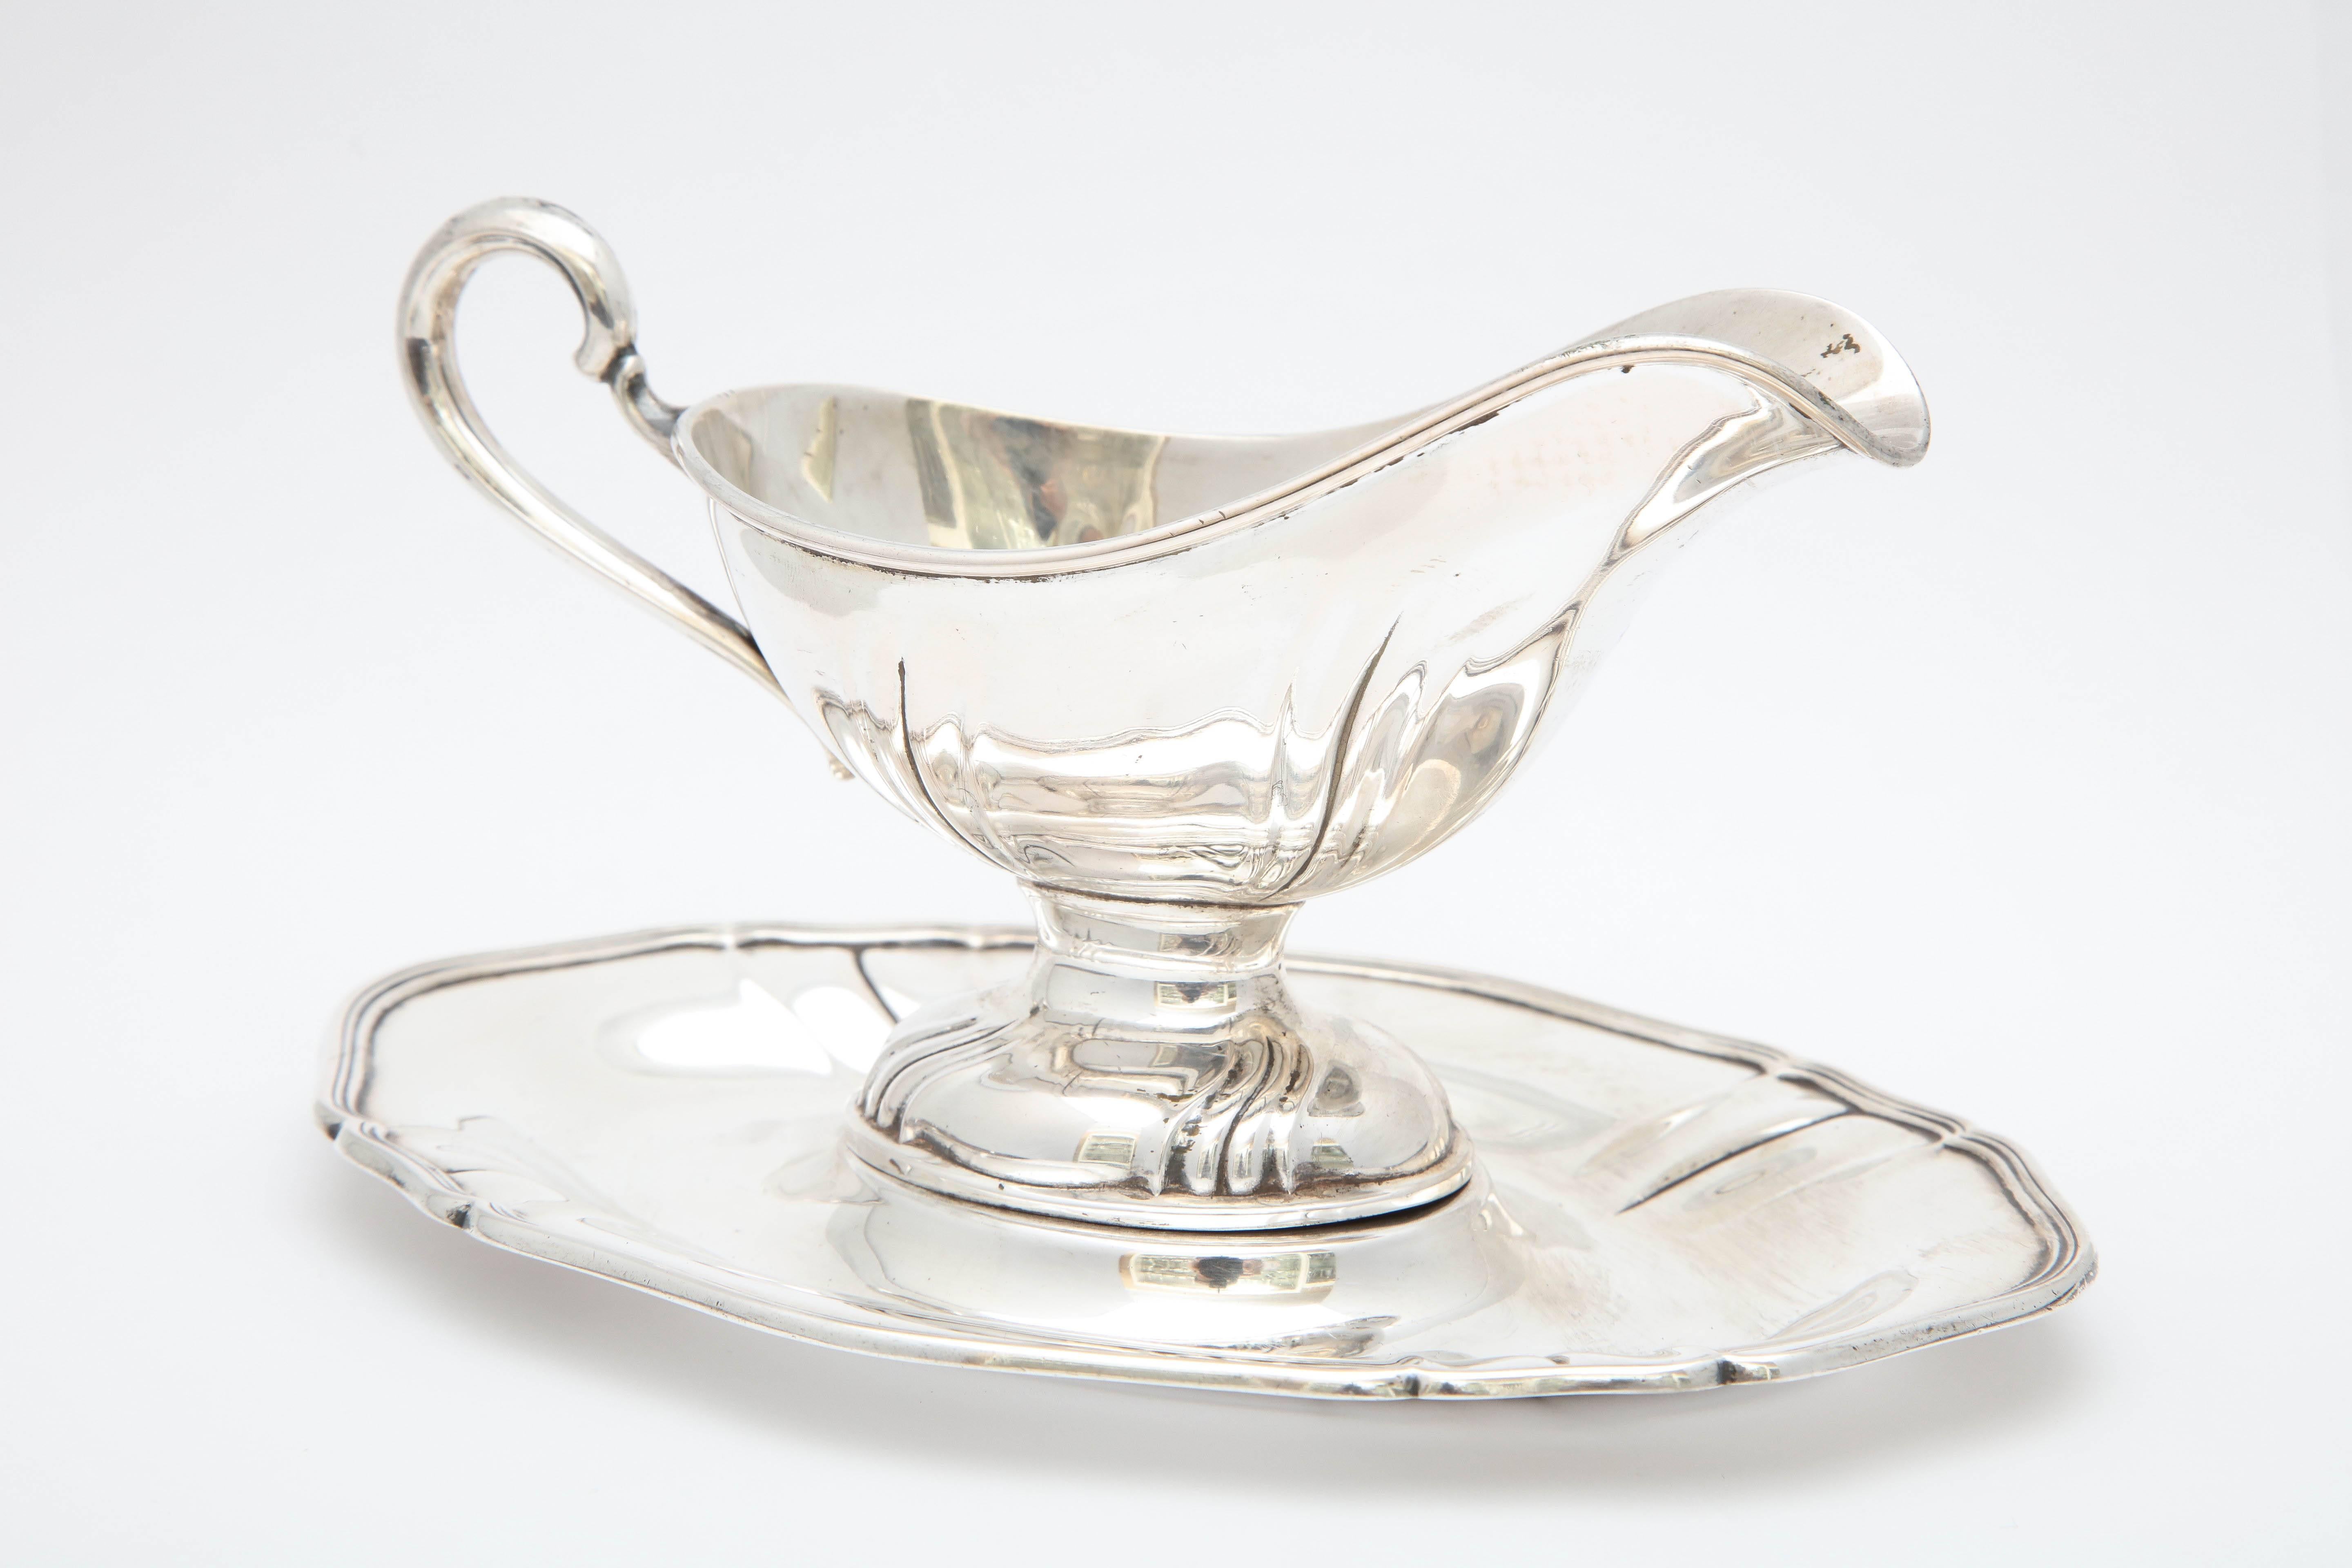 Victorian-style, Continental silver (.800) sauce/gravy boat on attached tray, Germany, circa 1910. Measures 4 inches high (at highest point) x 7 inches wide across tray x 5 inches deep. Weighs 5.690 troy ounces. Lovely swirled design. Small dint on